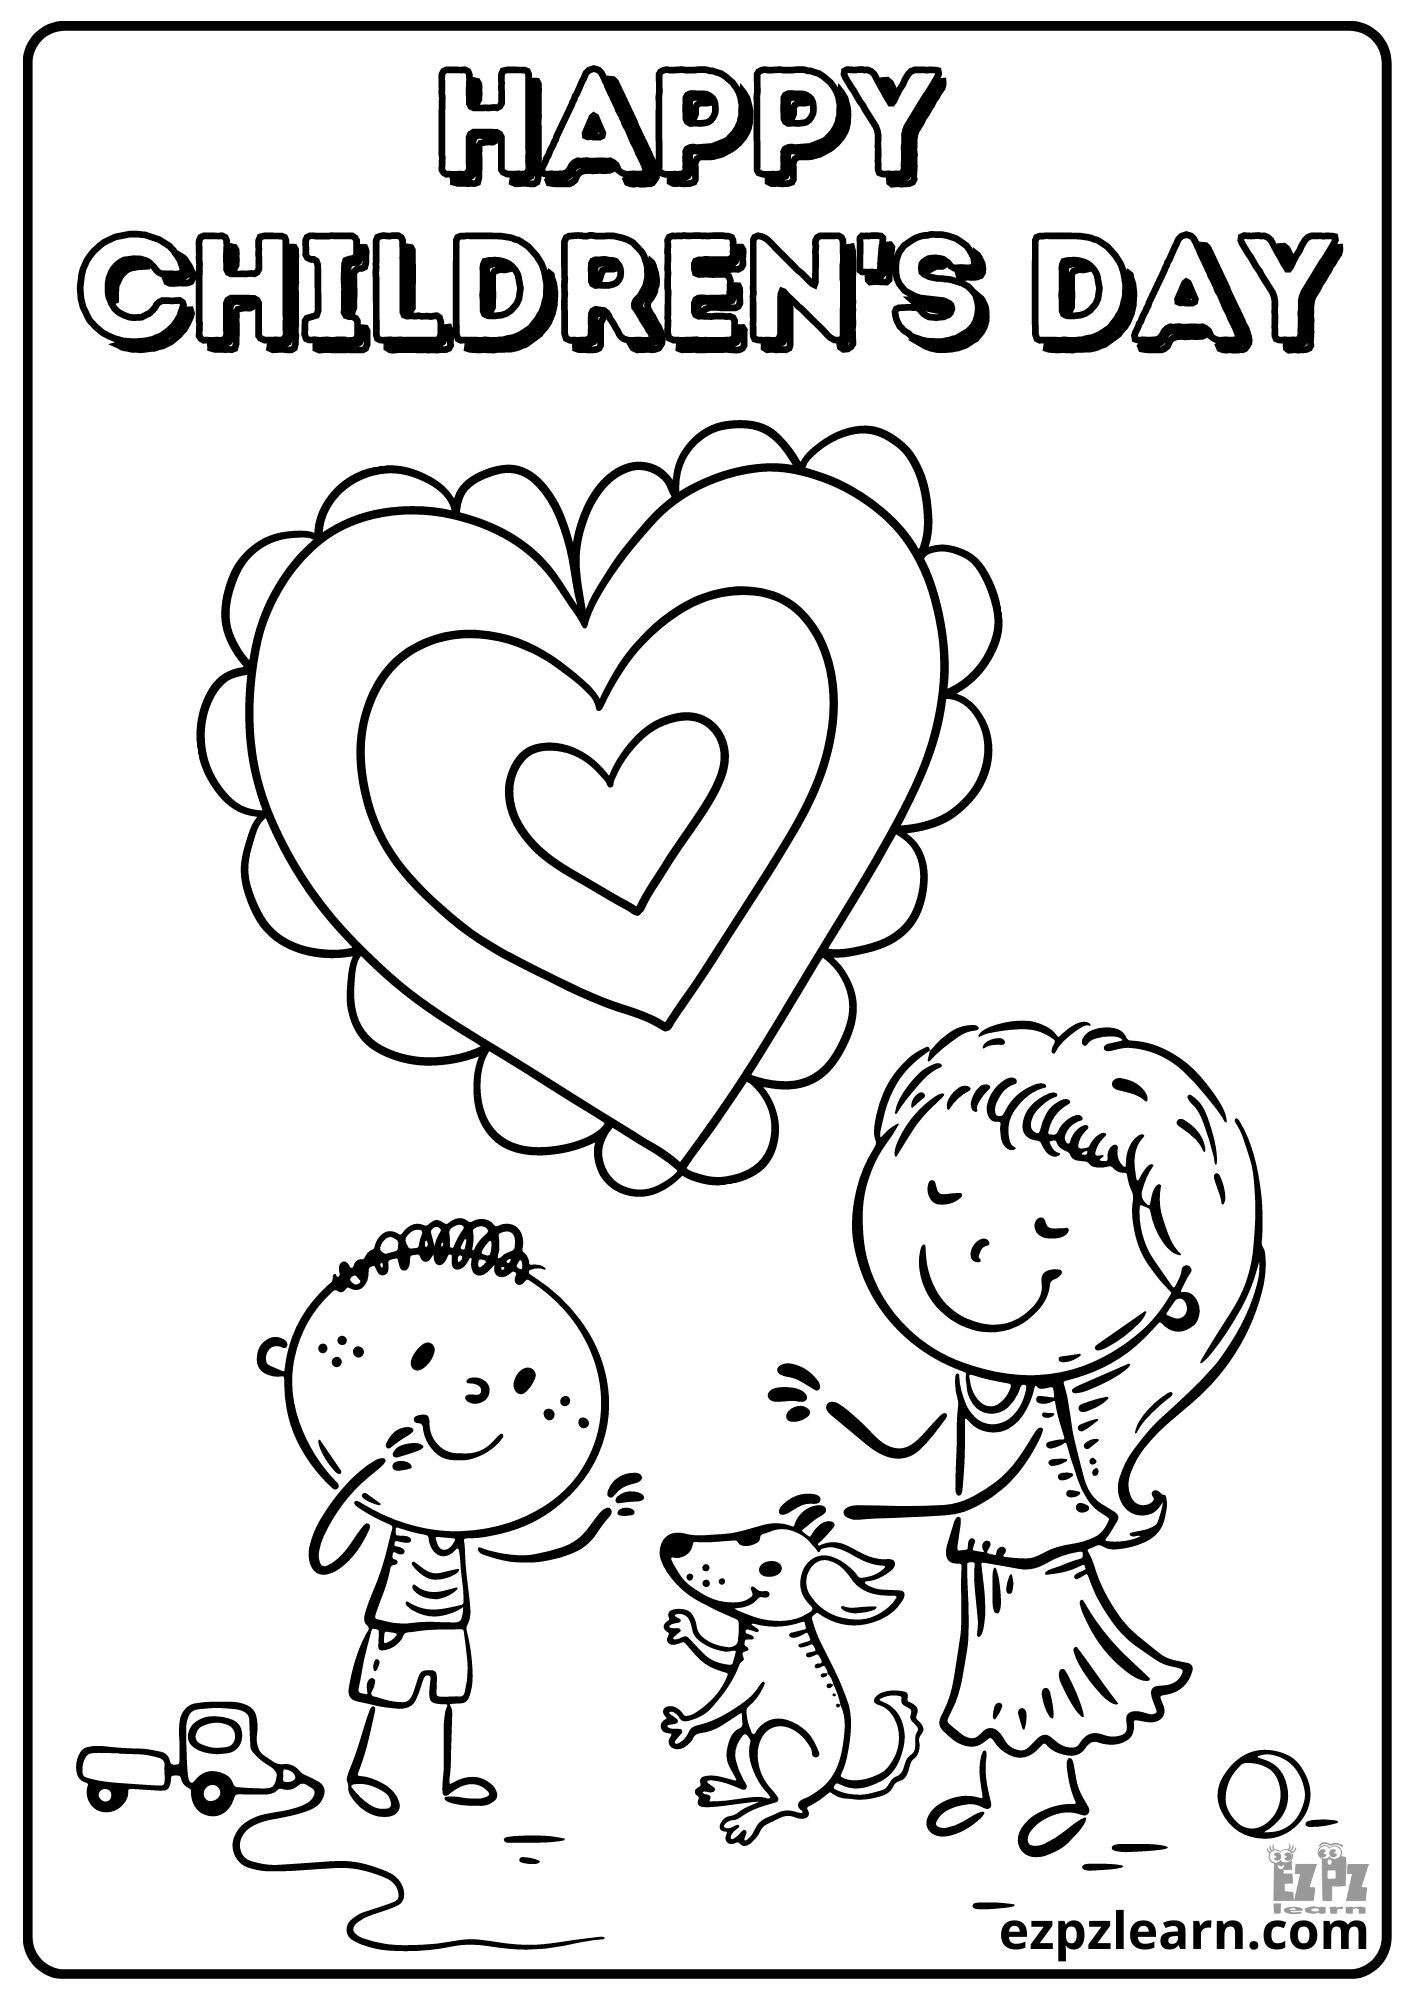 children-s-day-coloring-page-4-ezpzlearn